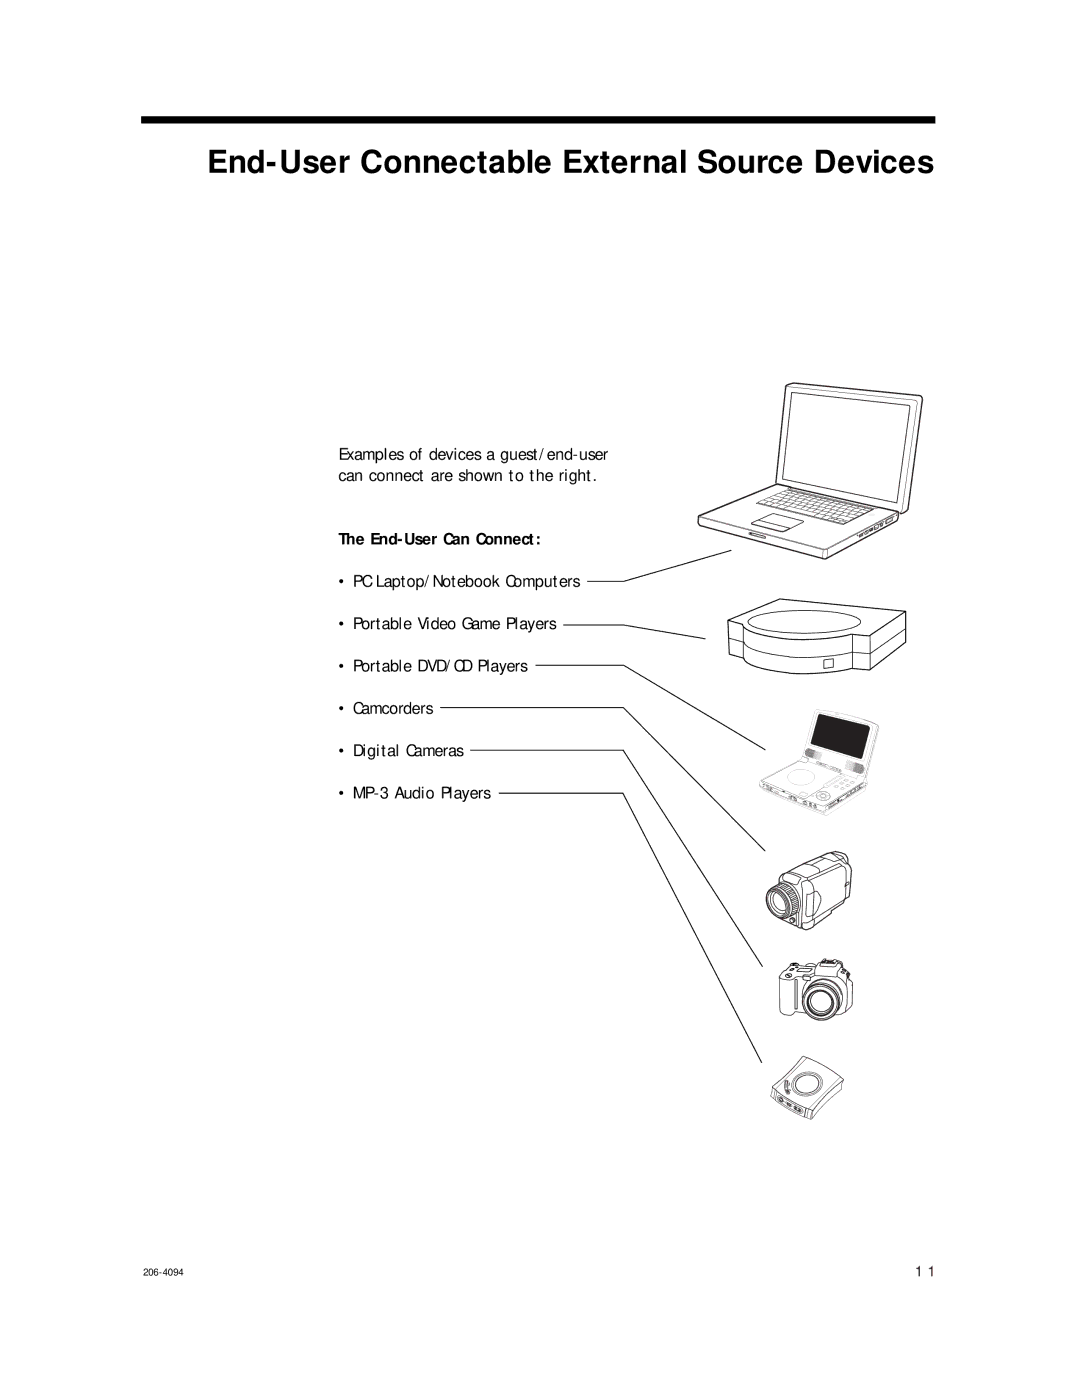 LG Electronics RJP-201B, 202B setup guide End-User Connectable External Source Devices, End-User Can Connect 